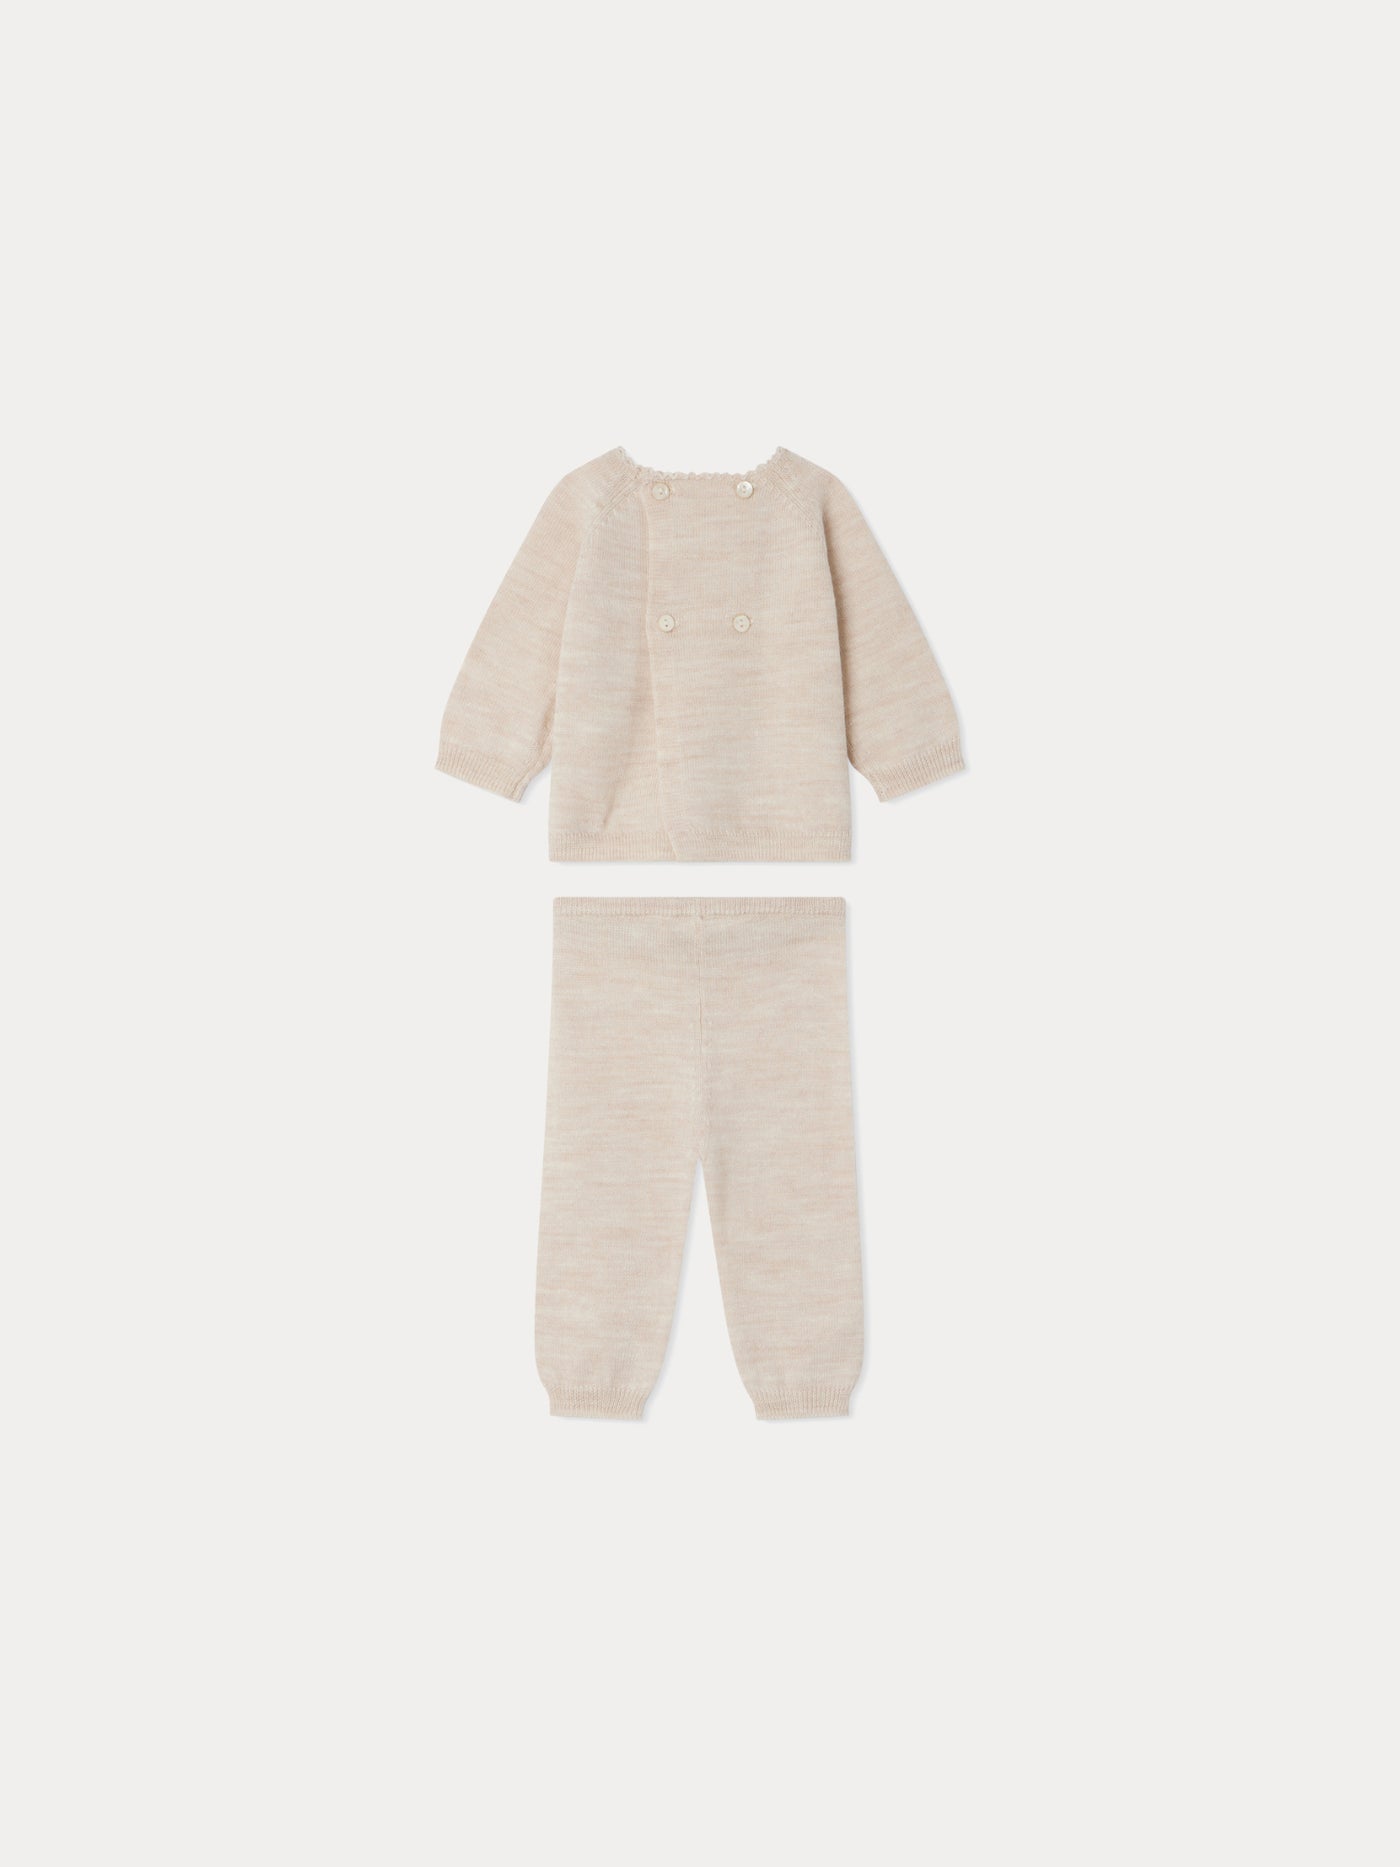 Bamba Outfit heathered beige